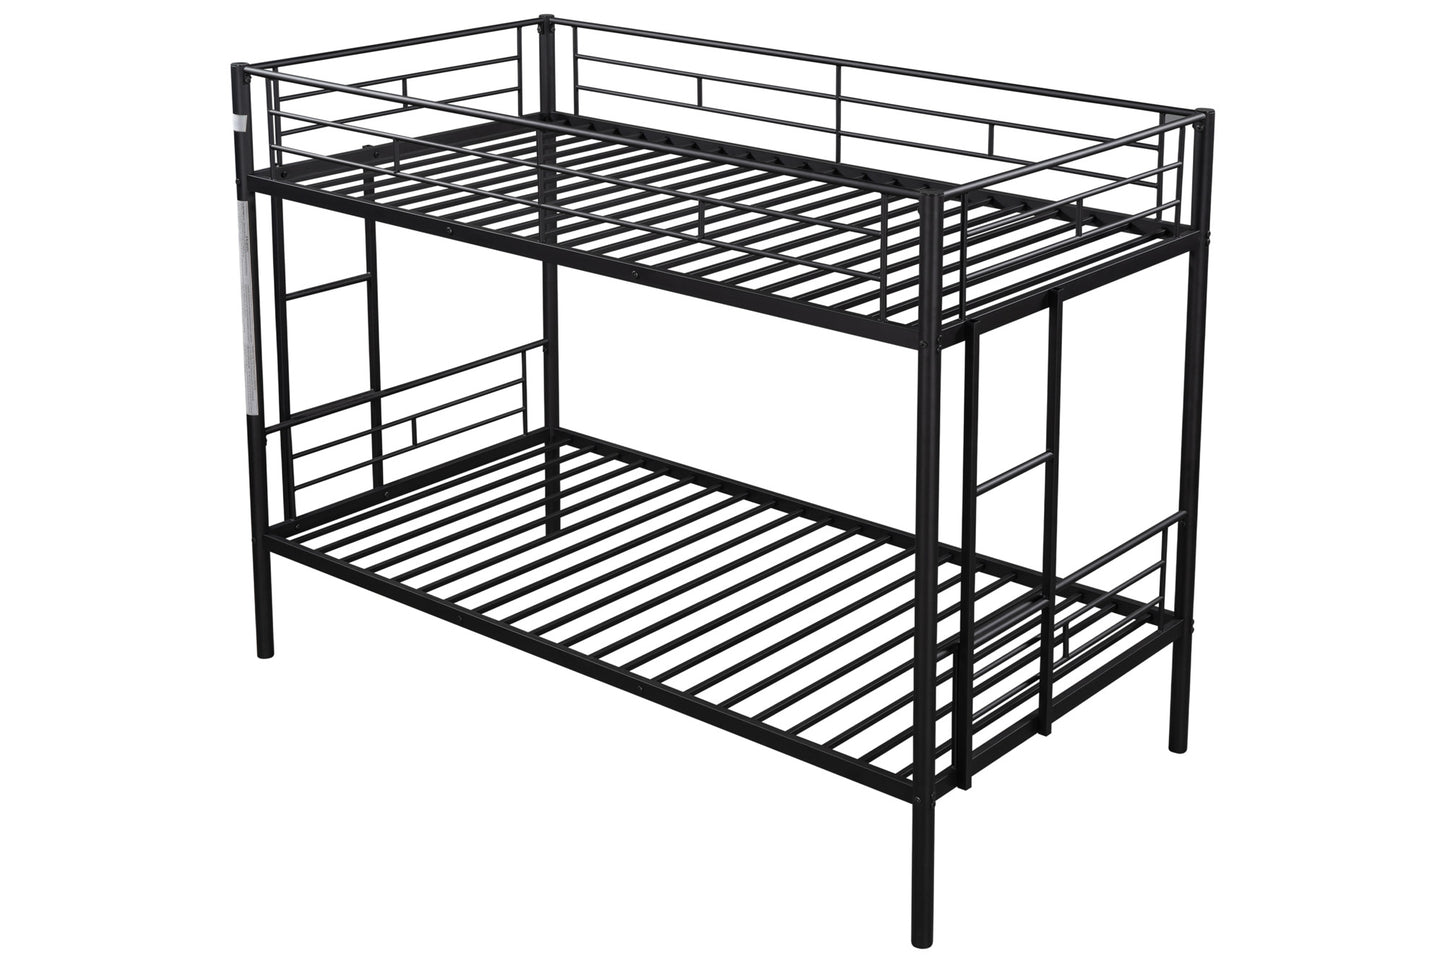 Bunk Beds Twin over Twin, Heavy Metal Bunk Bed Twin Size Sturdy 21 Slats Supported and Full-length Guardrail, Loft Bunk Bed Bedroom Furniture for Kids Teens, Black, LJ3311